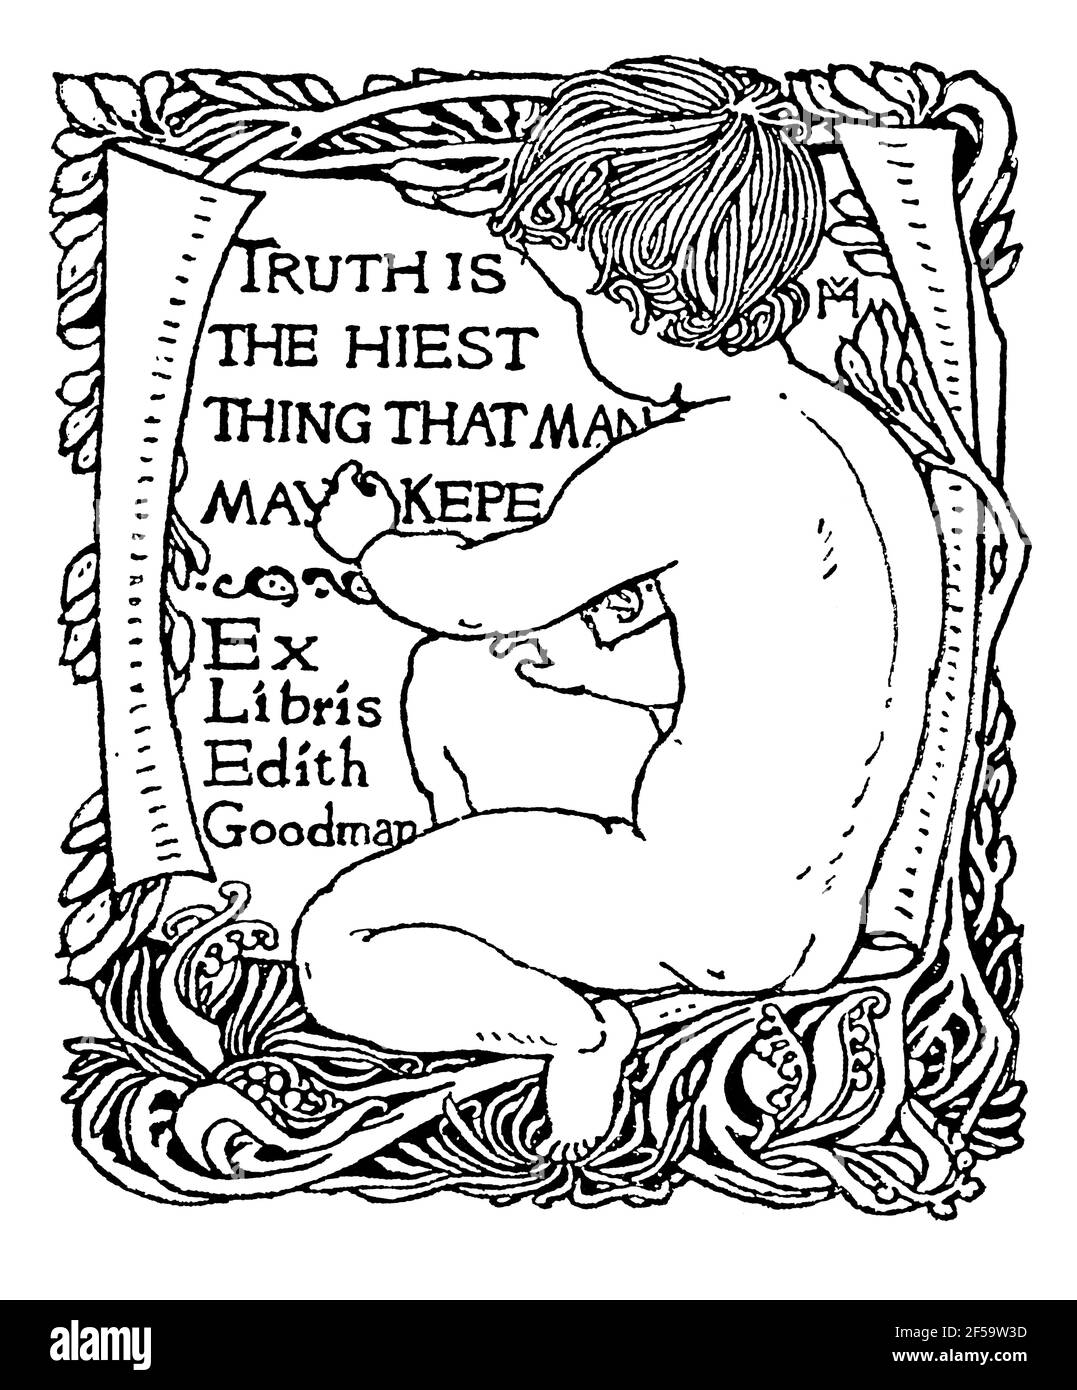 Truth is the hiest thing that man may kepe bookplate for Edith Goodman by English artist and book illustrator Violet Holden Stock Photo